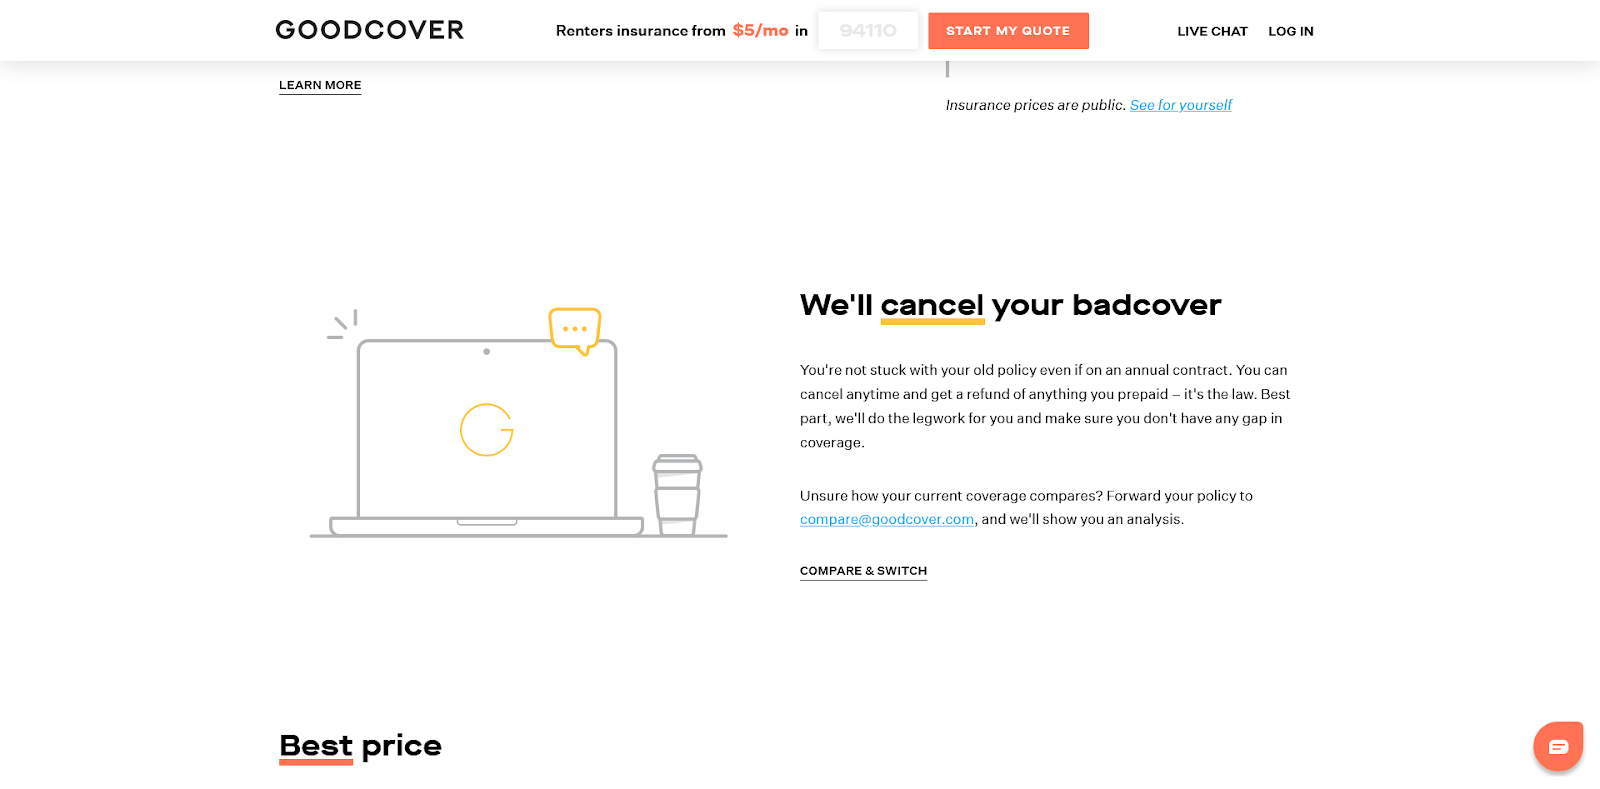 Goodcover Helps You Cancel Your Old Policy